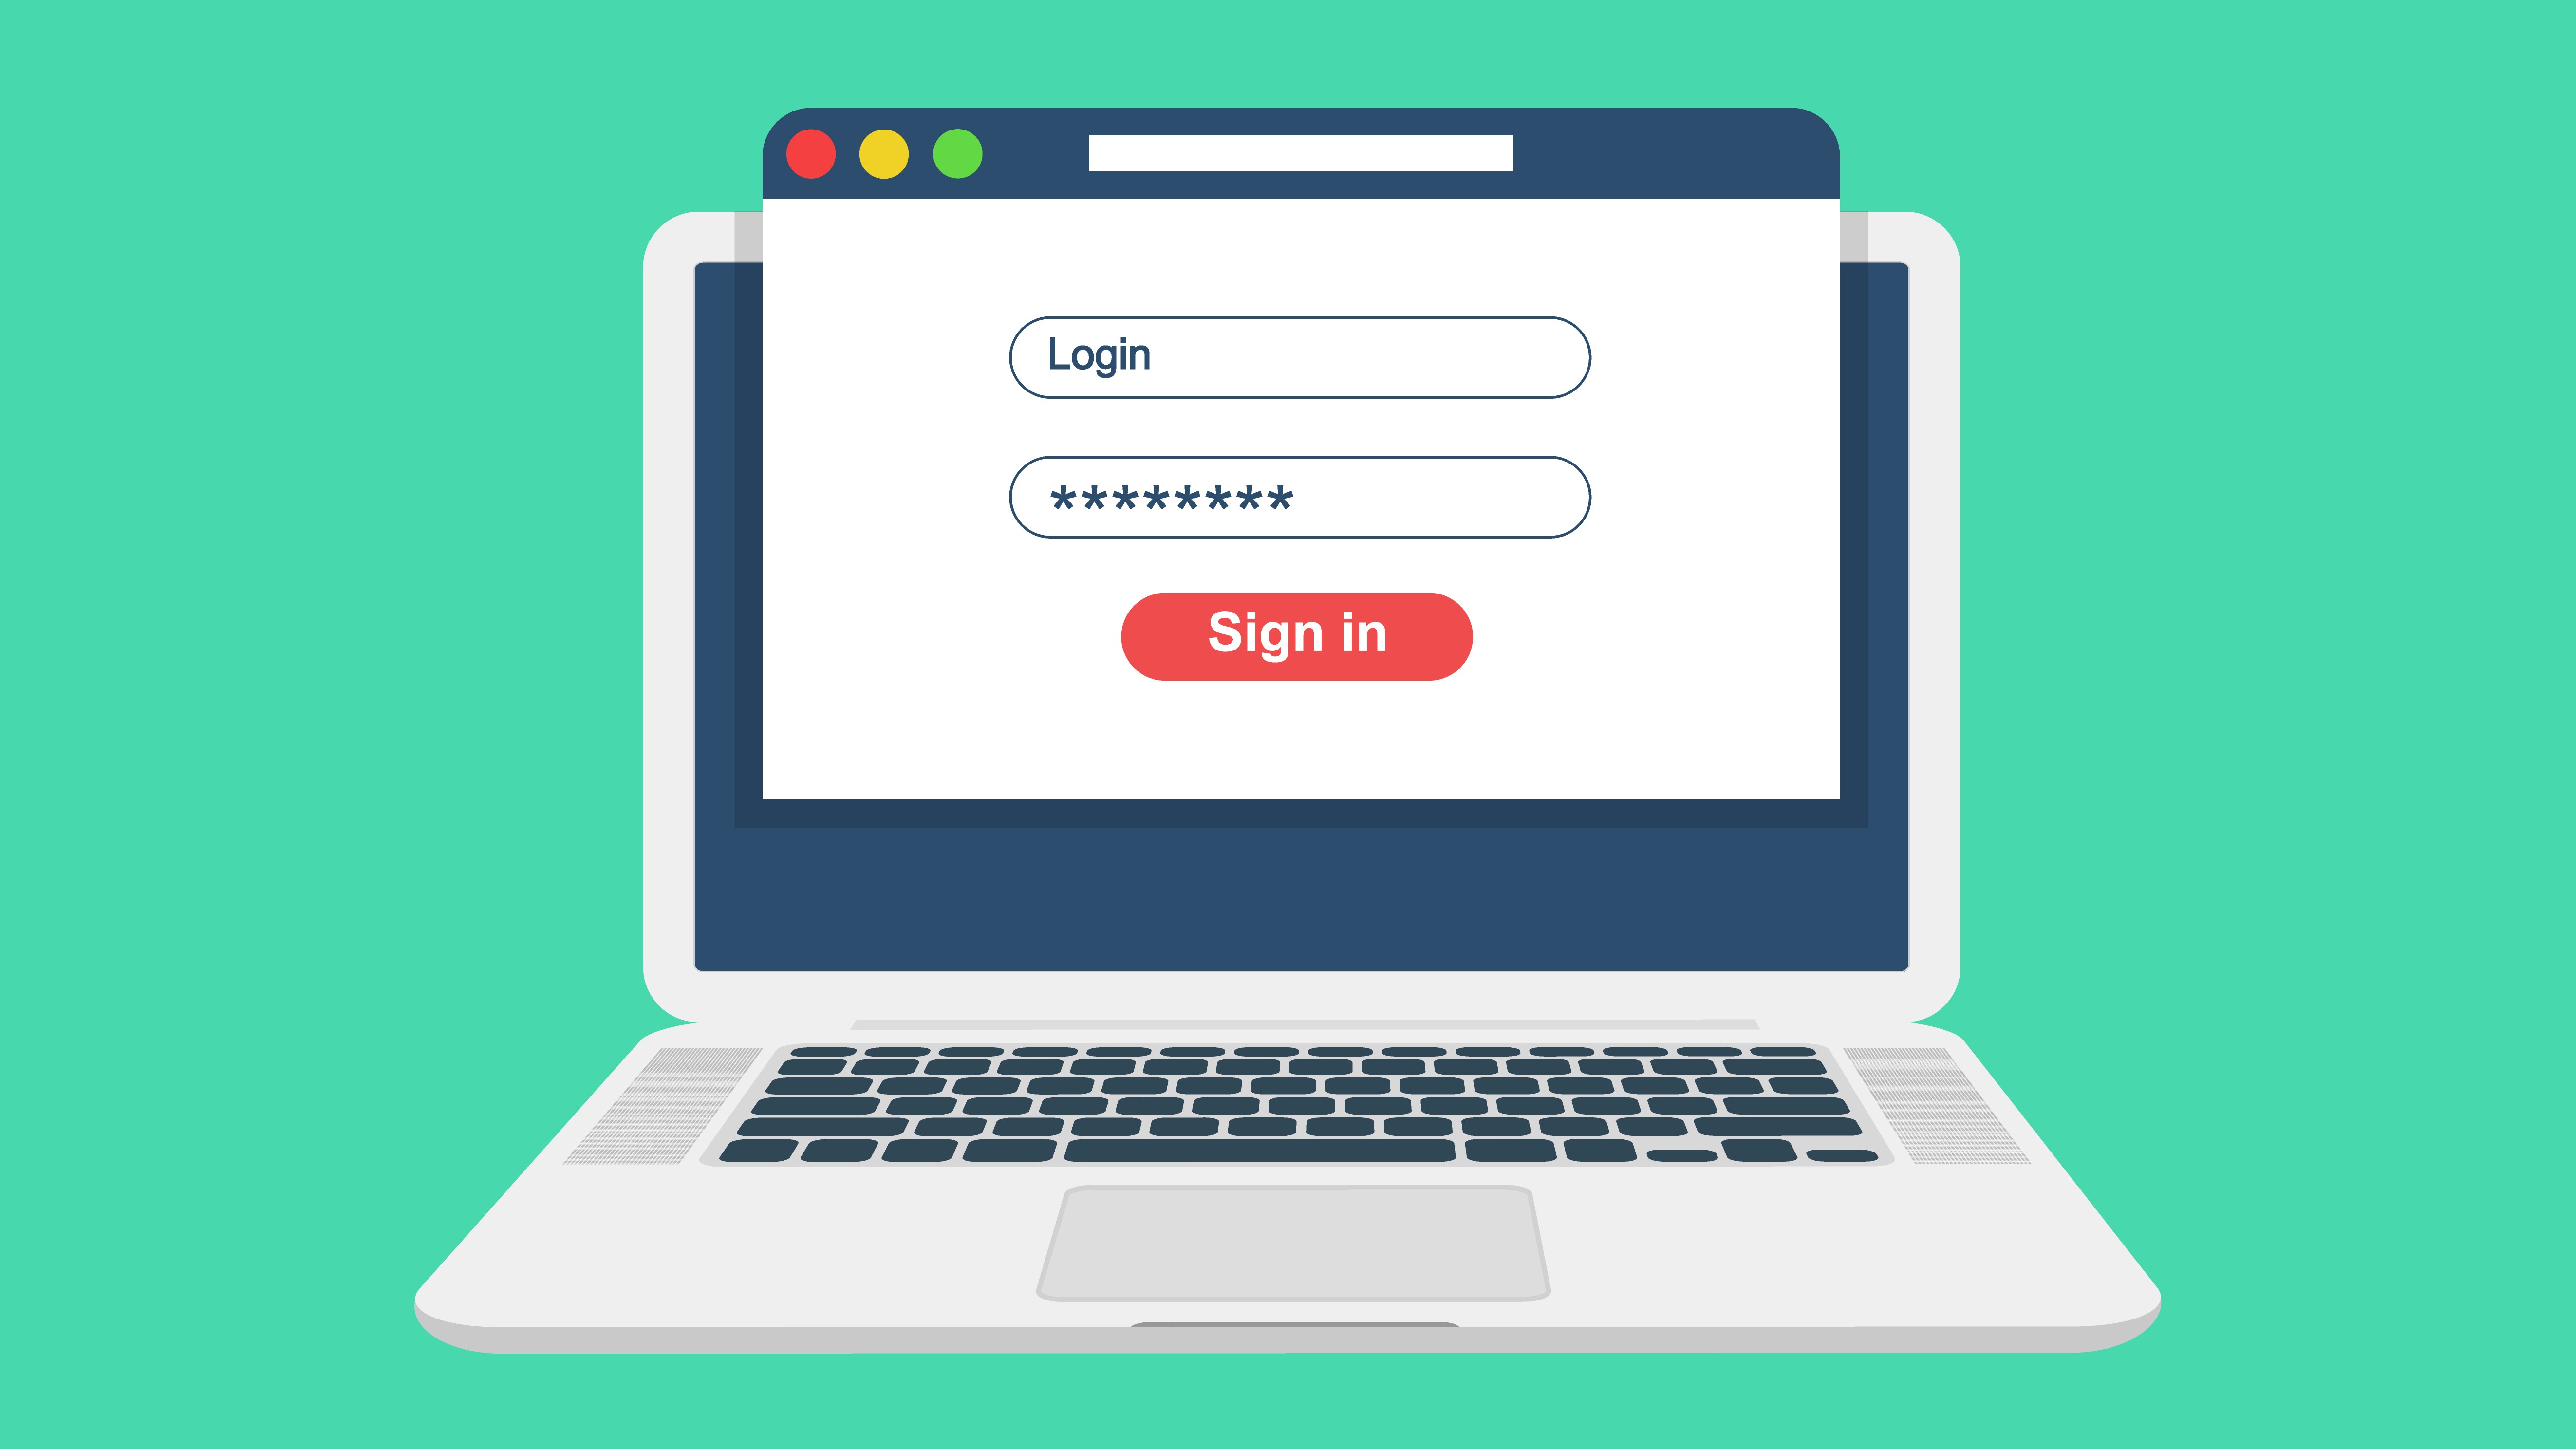 Illustration of a login screen on a laptop